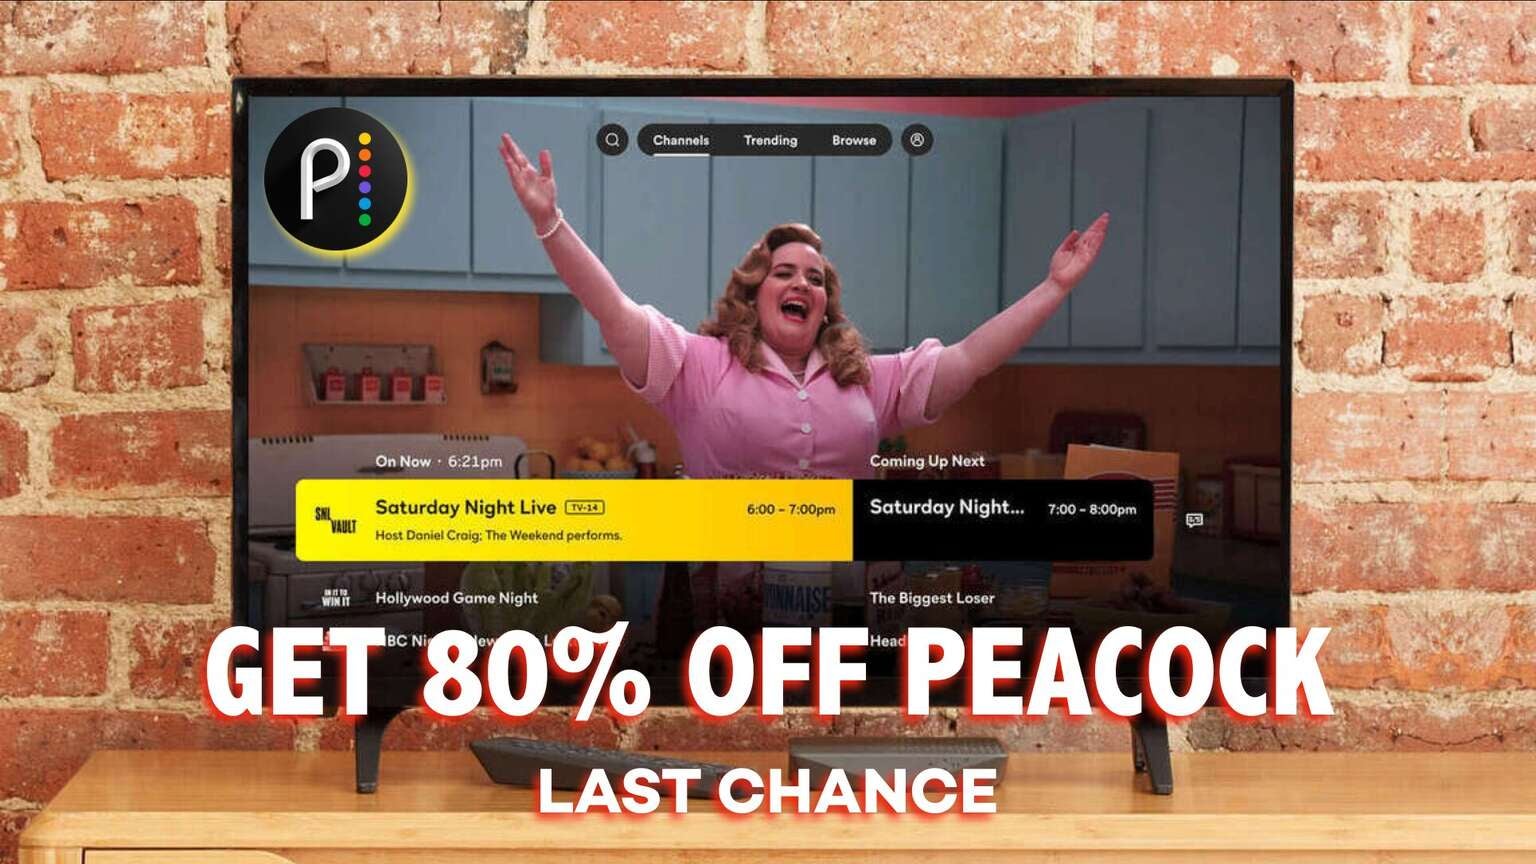 Peacock Cyber Monday Deal Last Chance to Get Peacock Premium for Just